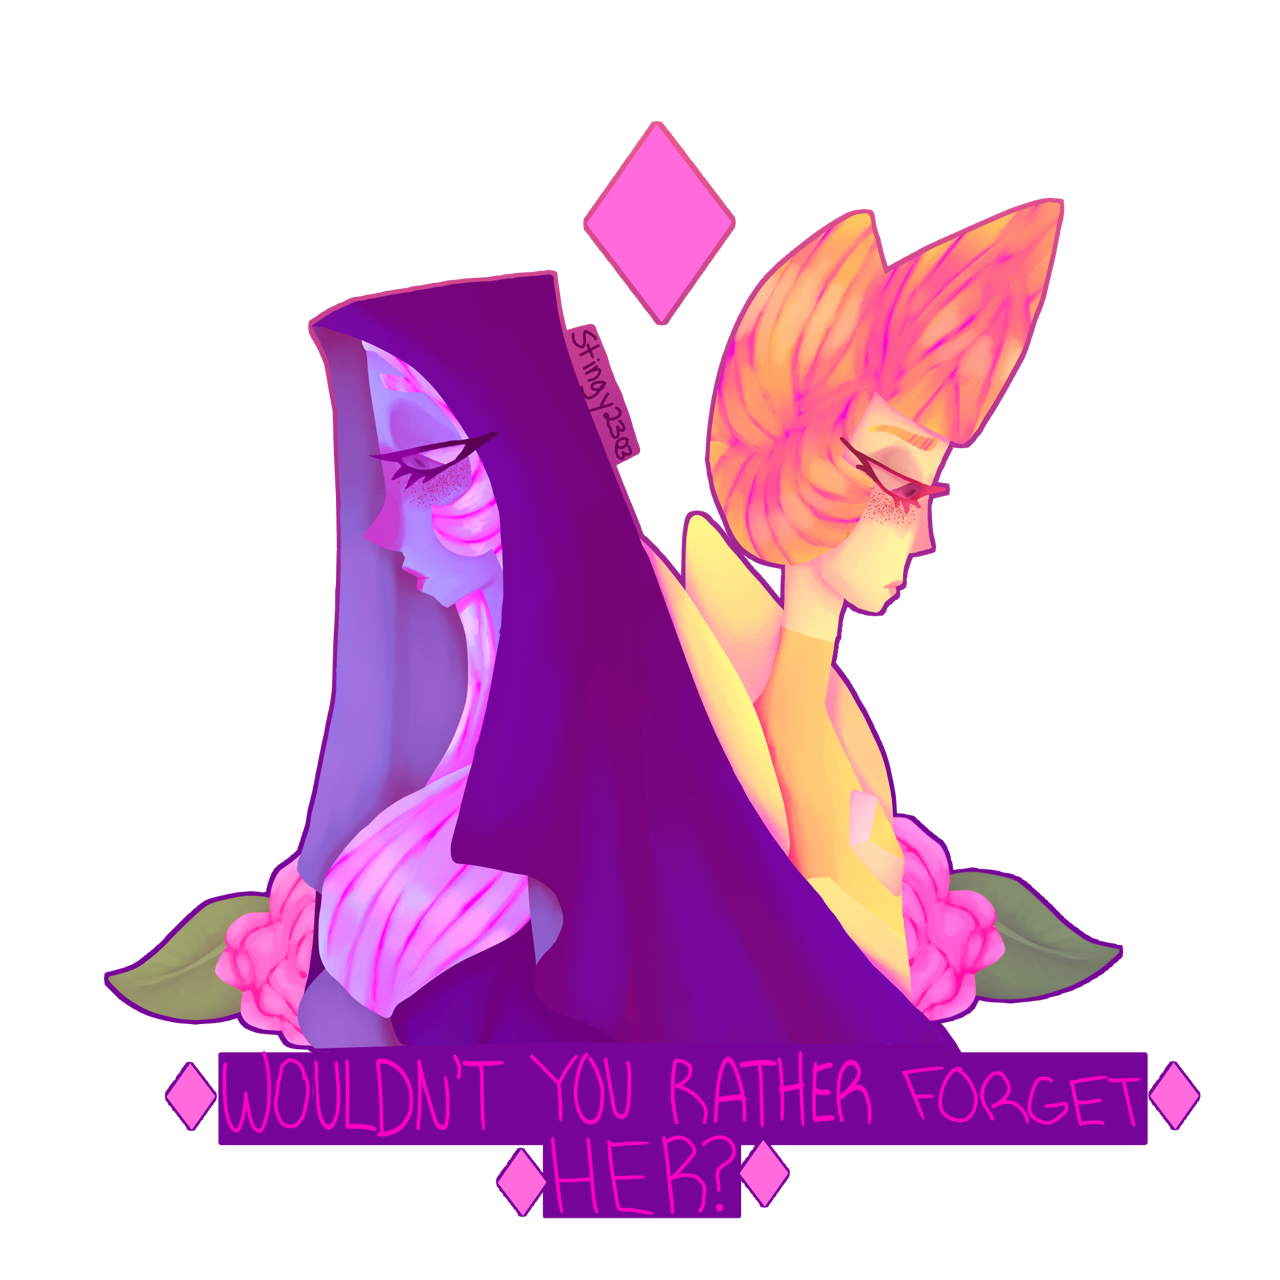 Have some vent art of the diamonds